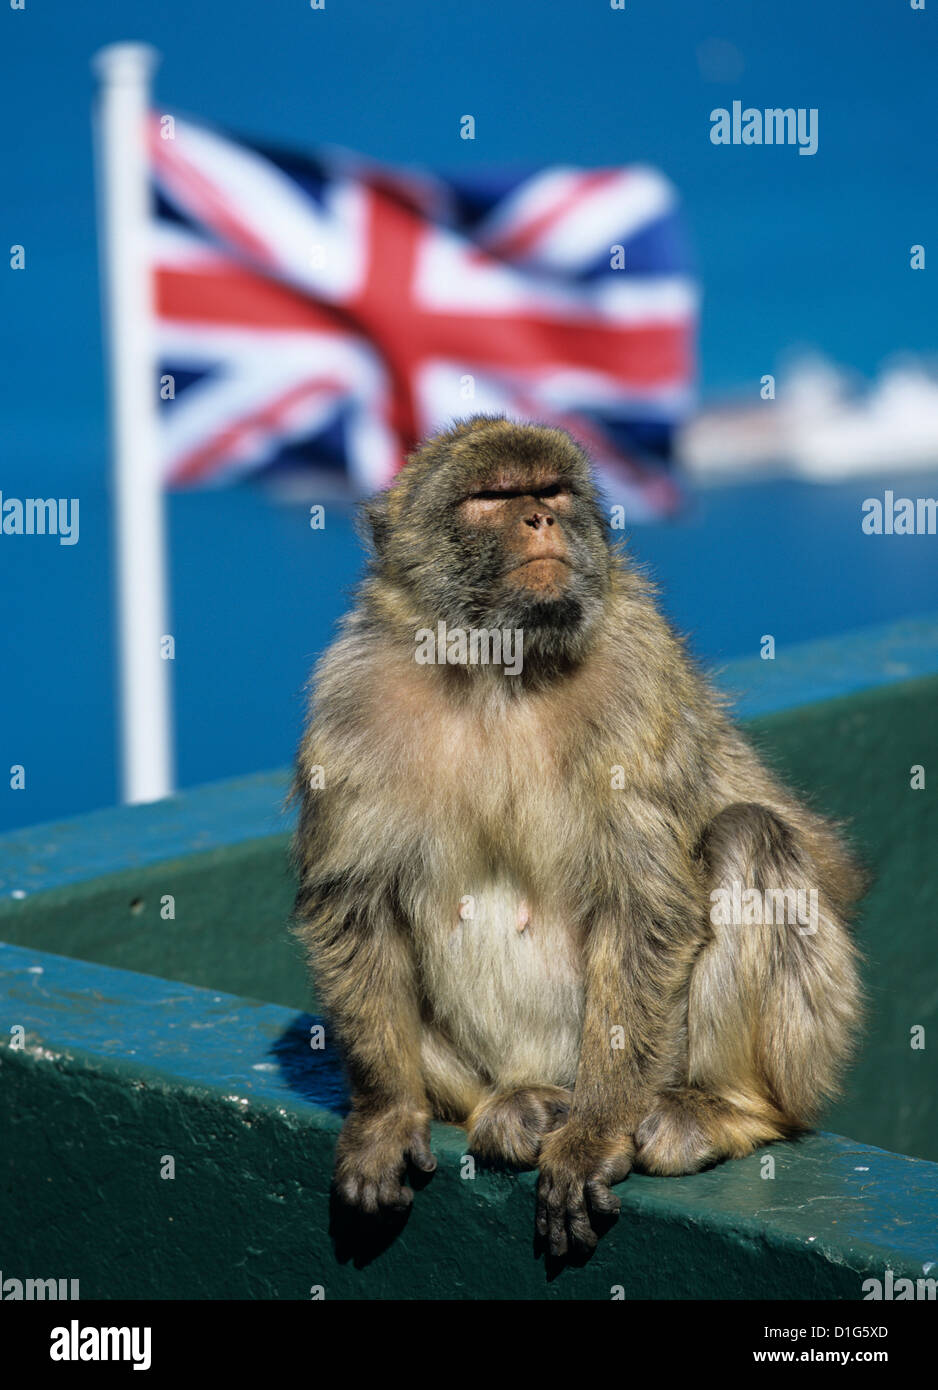 Barbary rock ape at the Top of the Rock, Gibraltar, British overseas territory, Europe Stock Photo